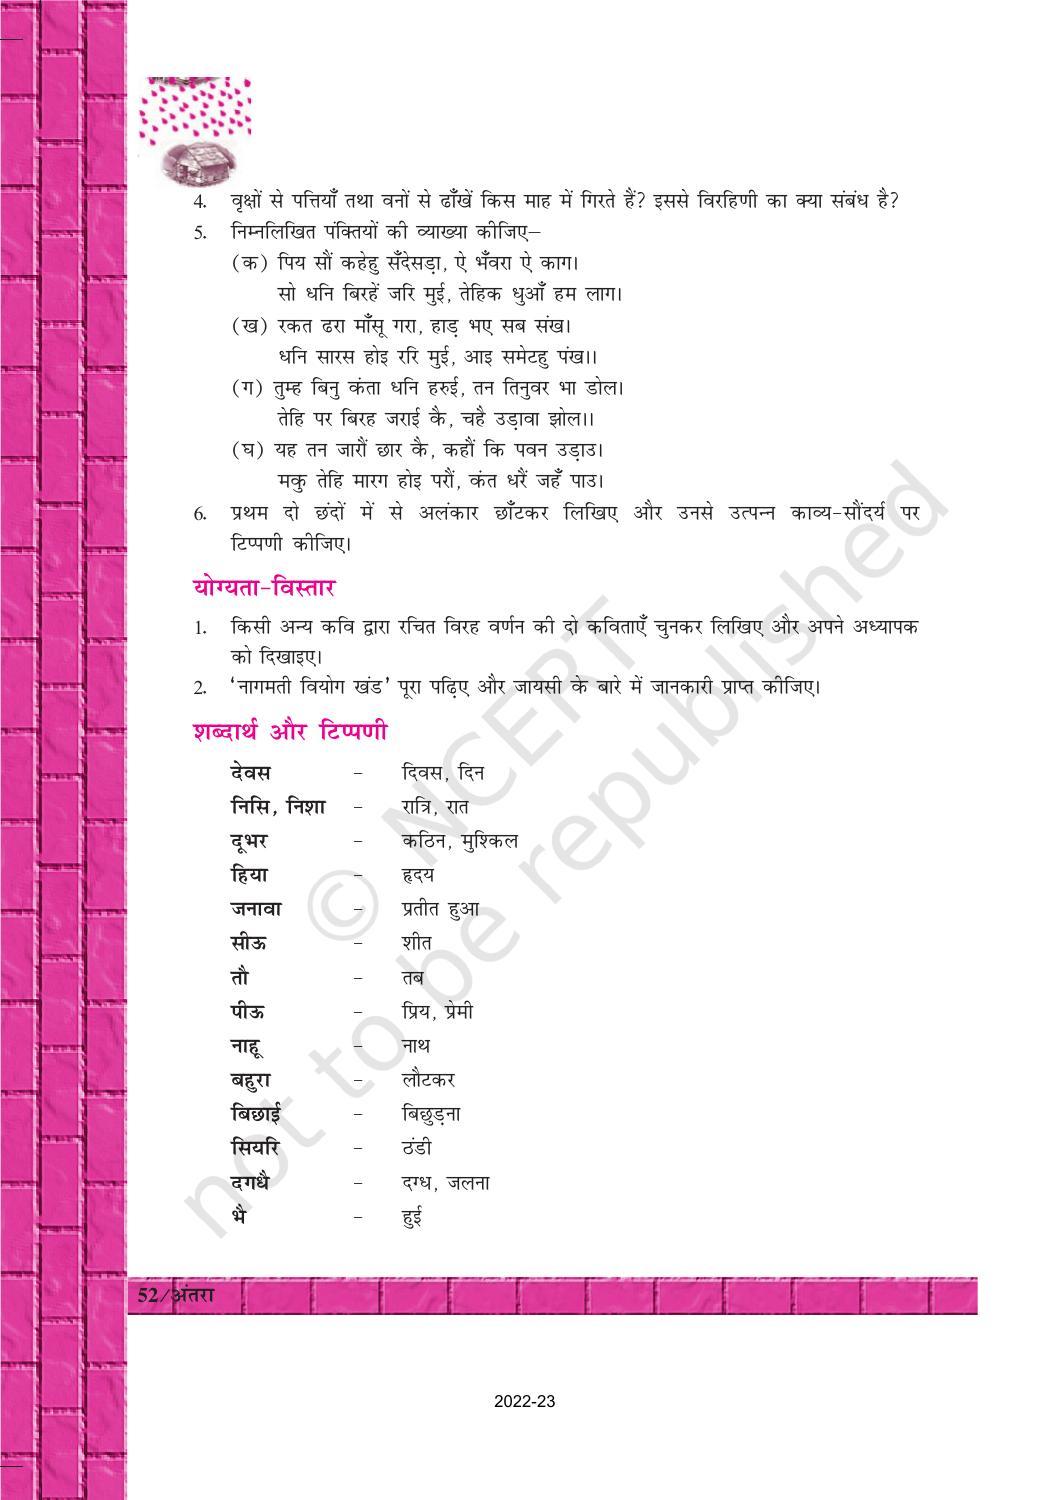 NCERT Book for Class 12 Hindi Antra Chapter 8 मलिक मुहम्मद जायसी - Page 5